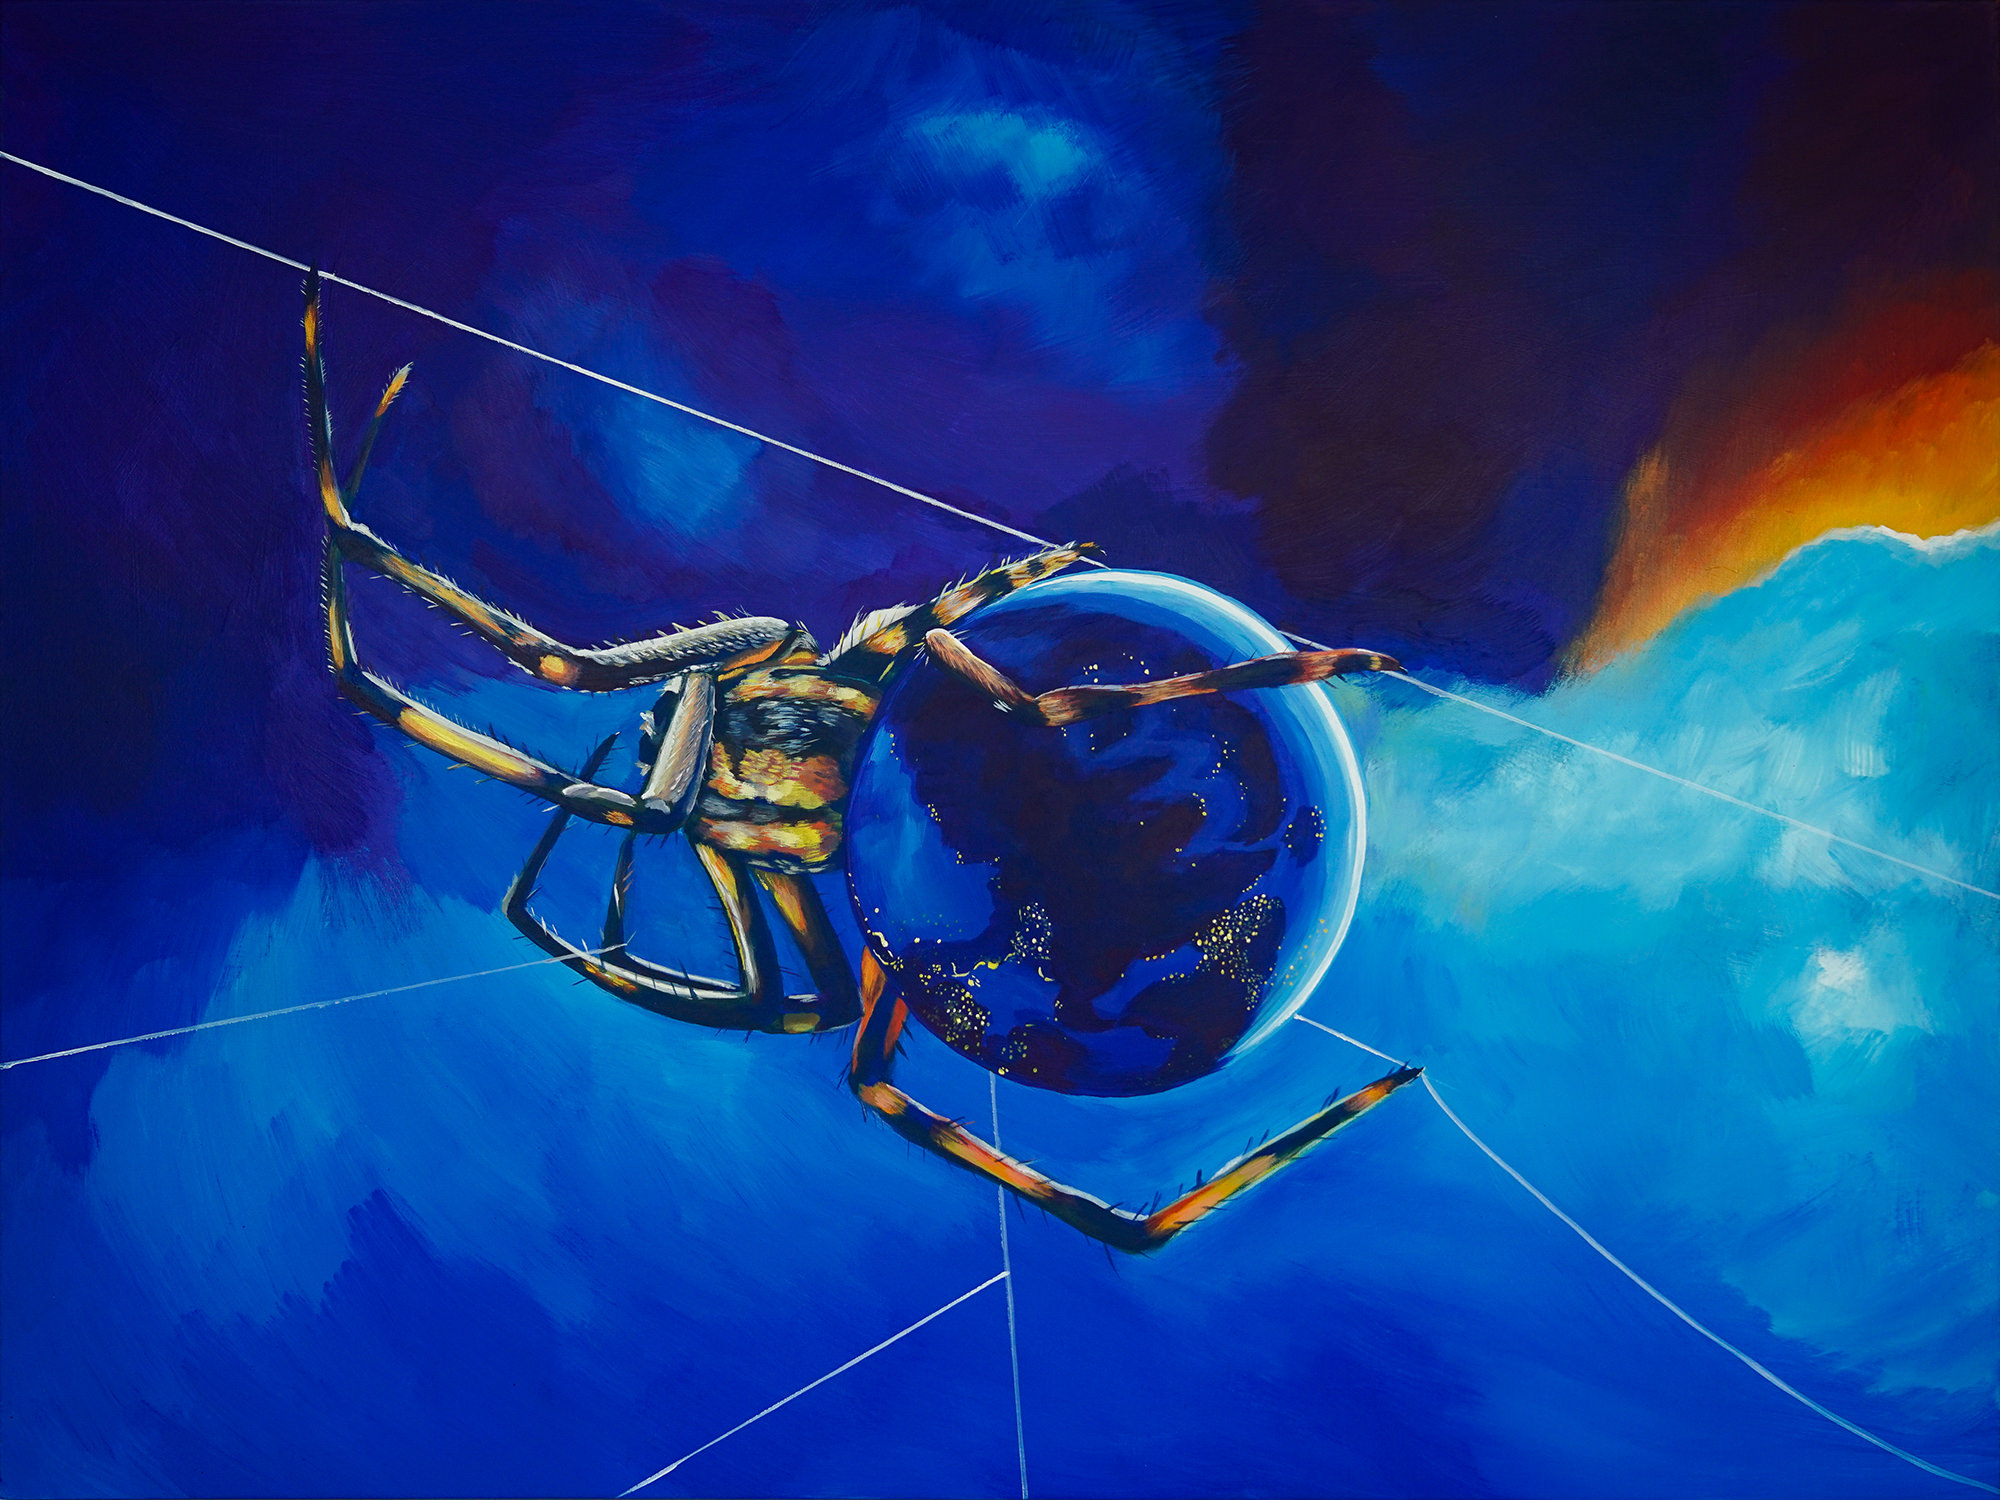 Globe Weaver Orb Weaver Spider - acrylic painting on canvas - contemporary art - earth